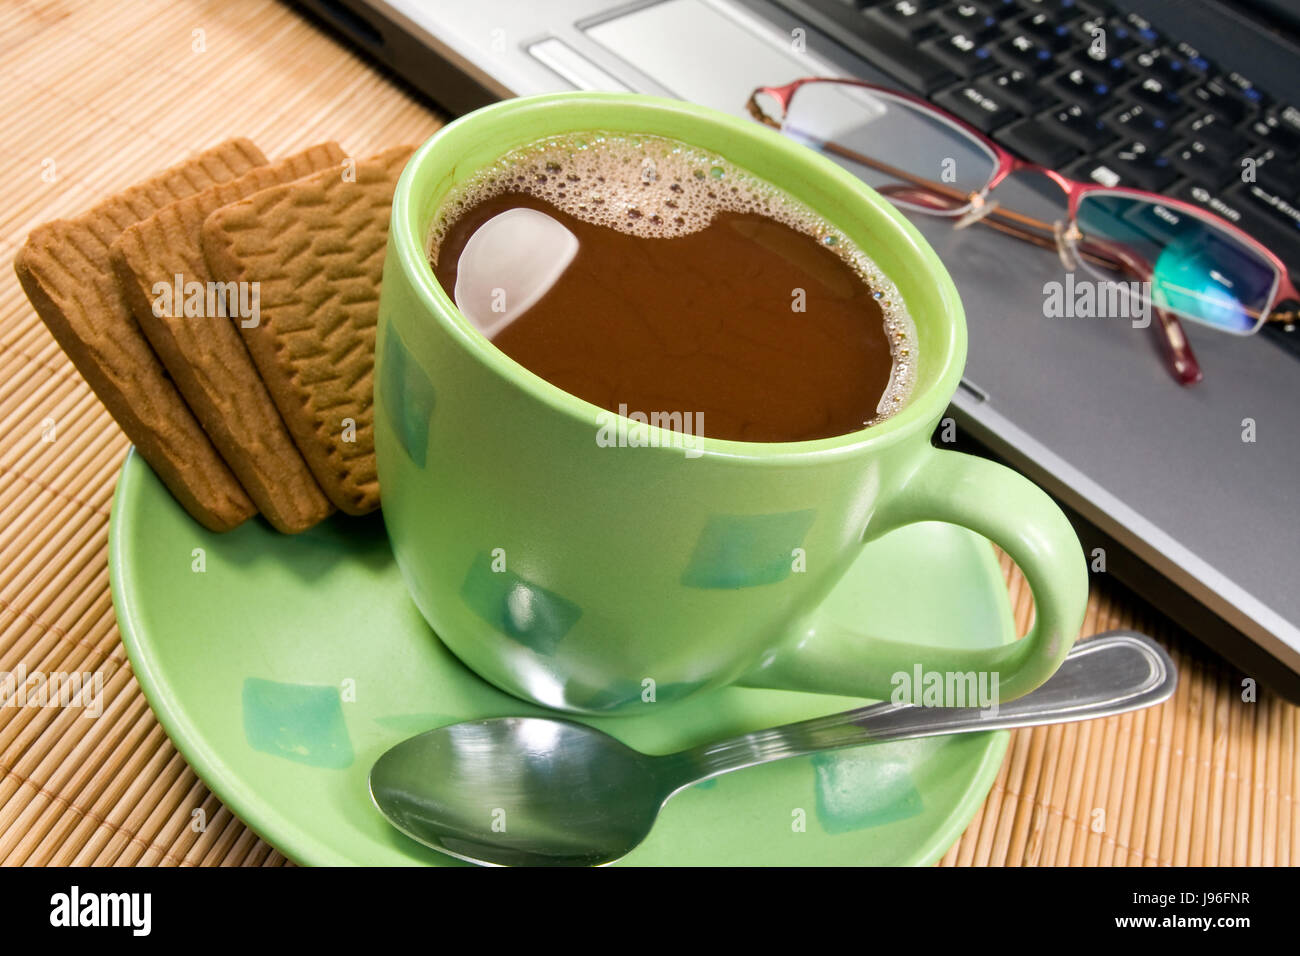 cup, laptop, notebook, computers, computer, business dealings, deal, business Stock Photo